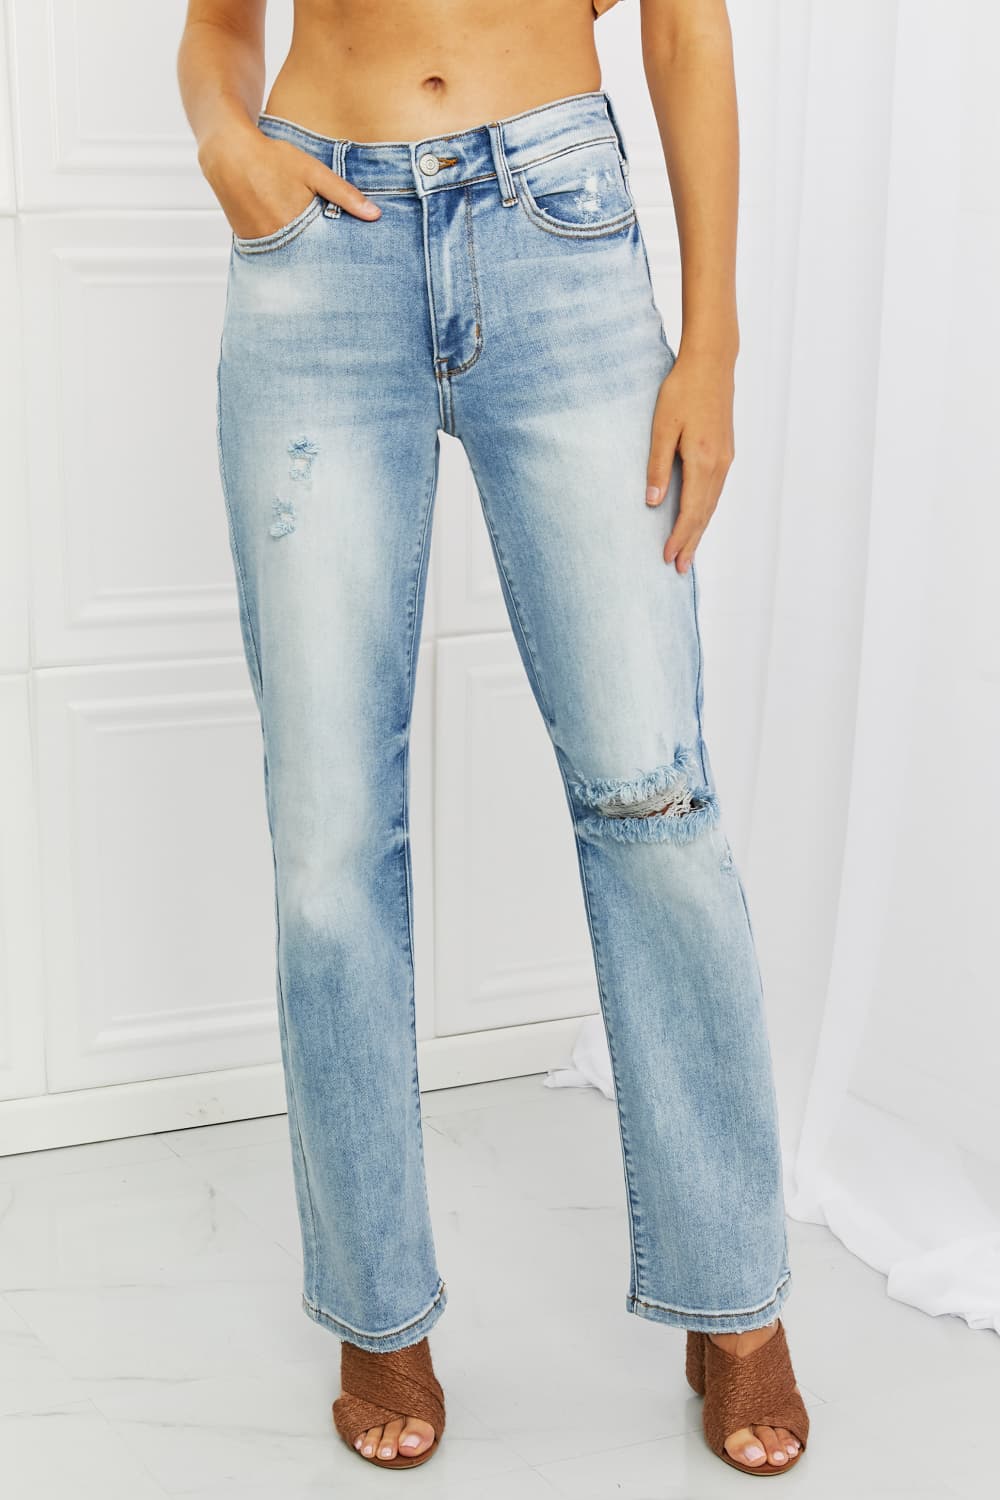 Judy Blue Natalie Full Size Distressed Straight Leg Jeans - nailedmoms